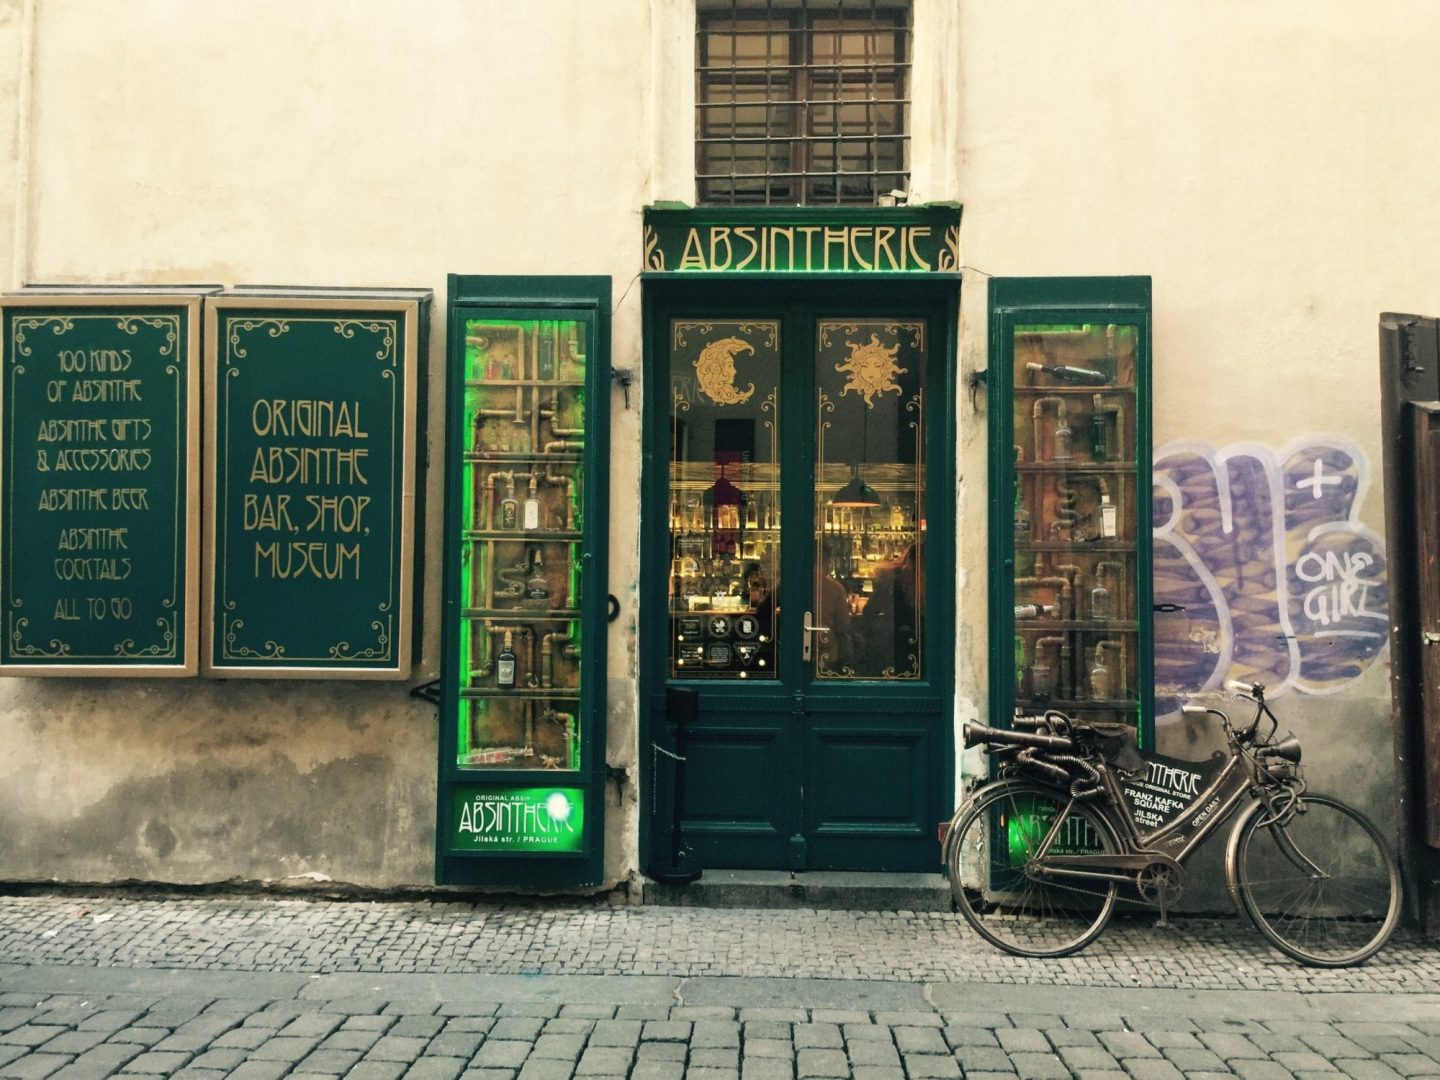 Front door of the famous czech bar Absintherie, famous for the absinthe-based drinks.